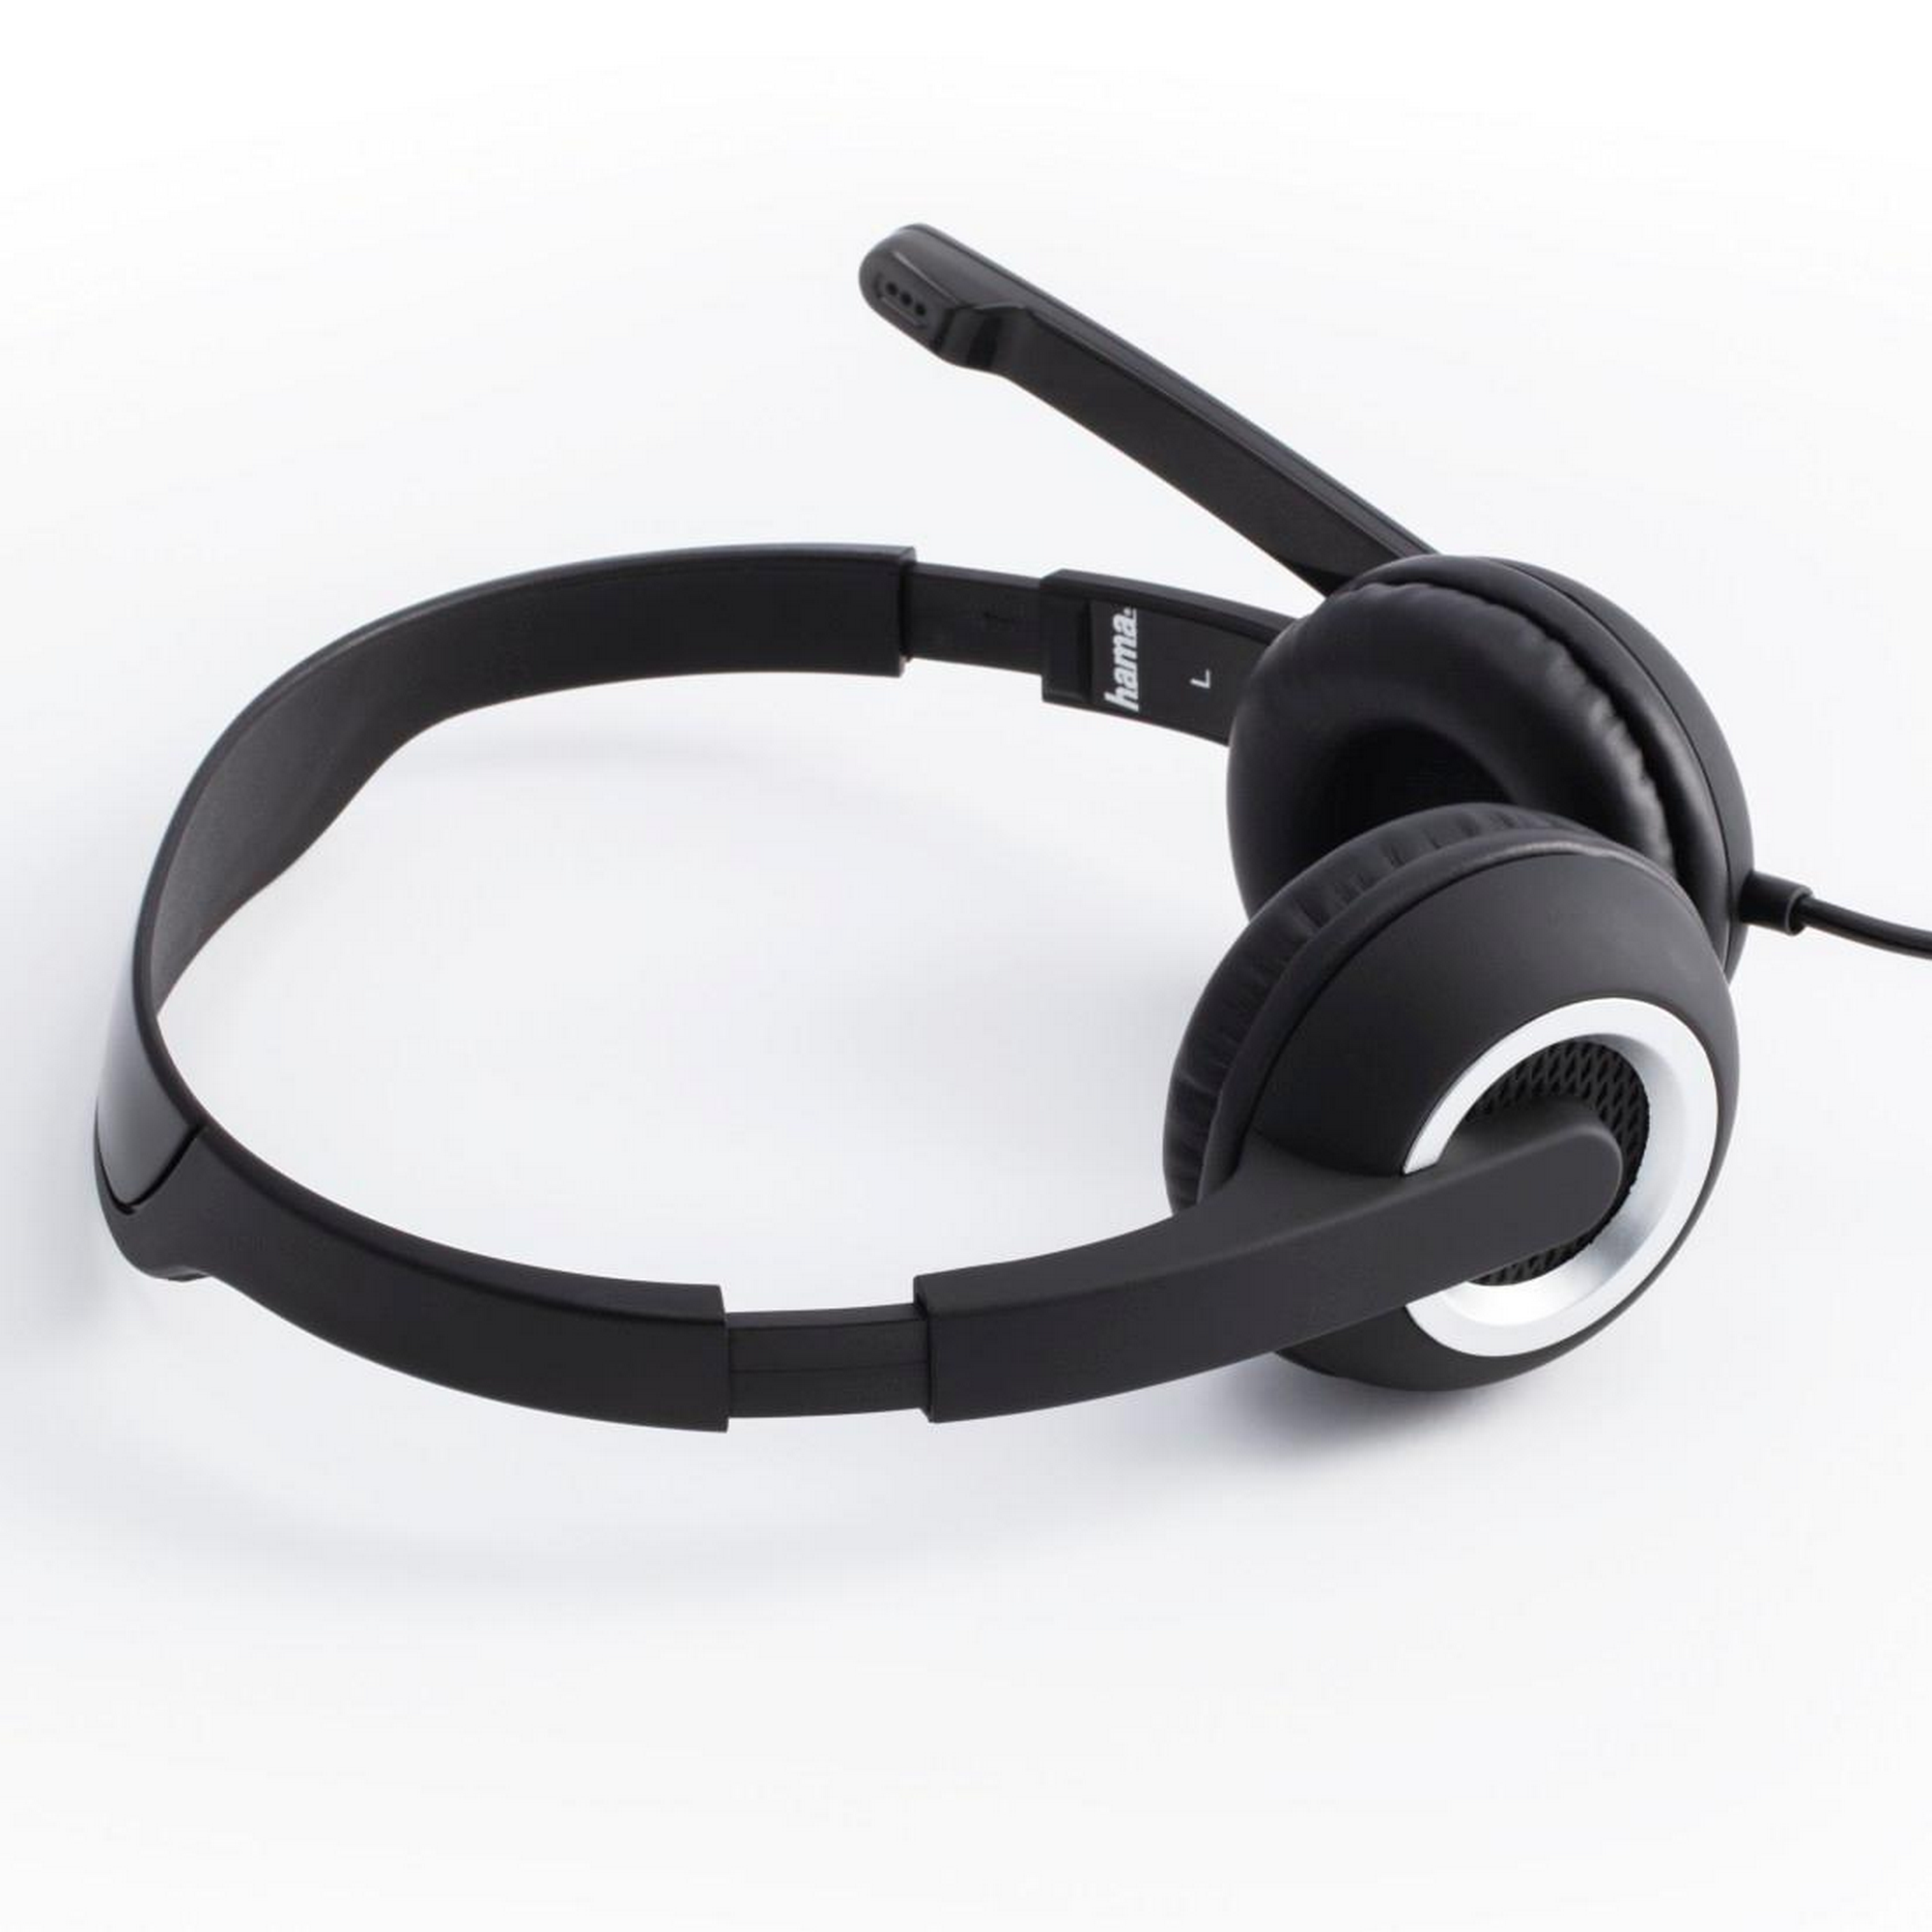 PC-Office-Headset 'HS-P150' Stereo schwarz kabelgebunden + product picture